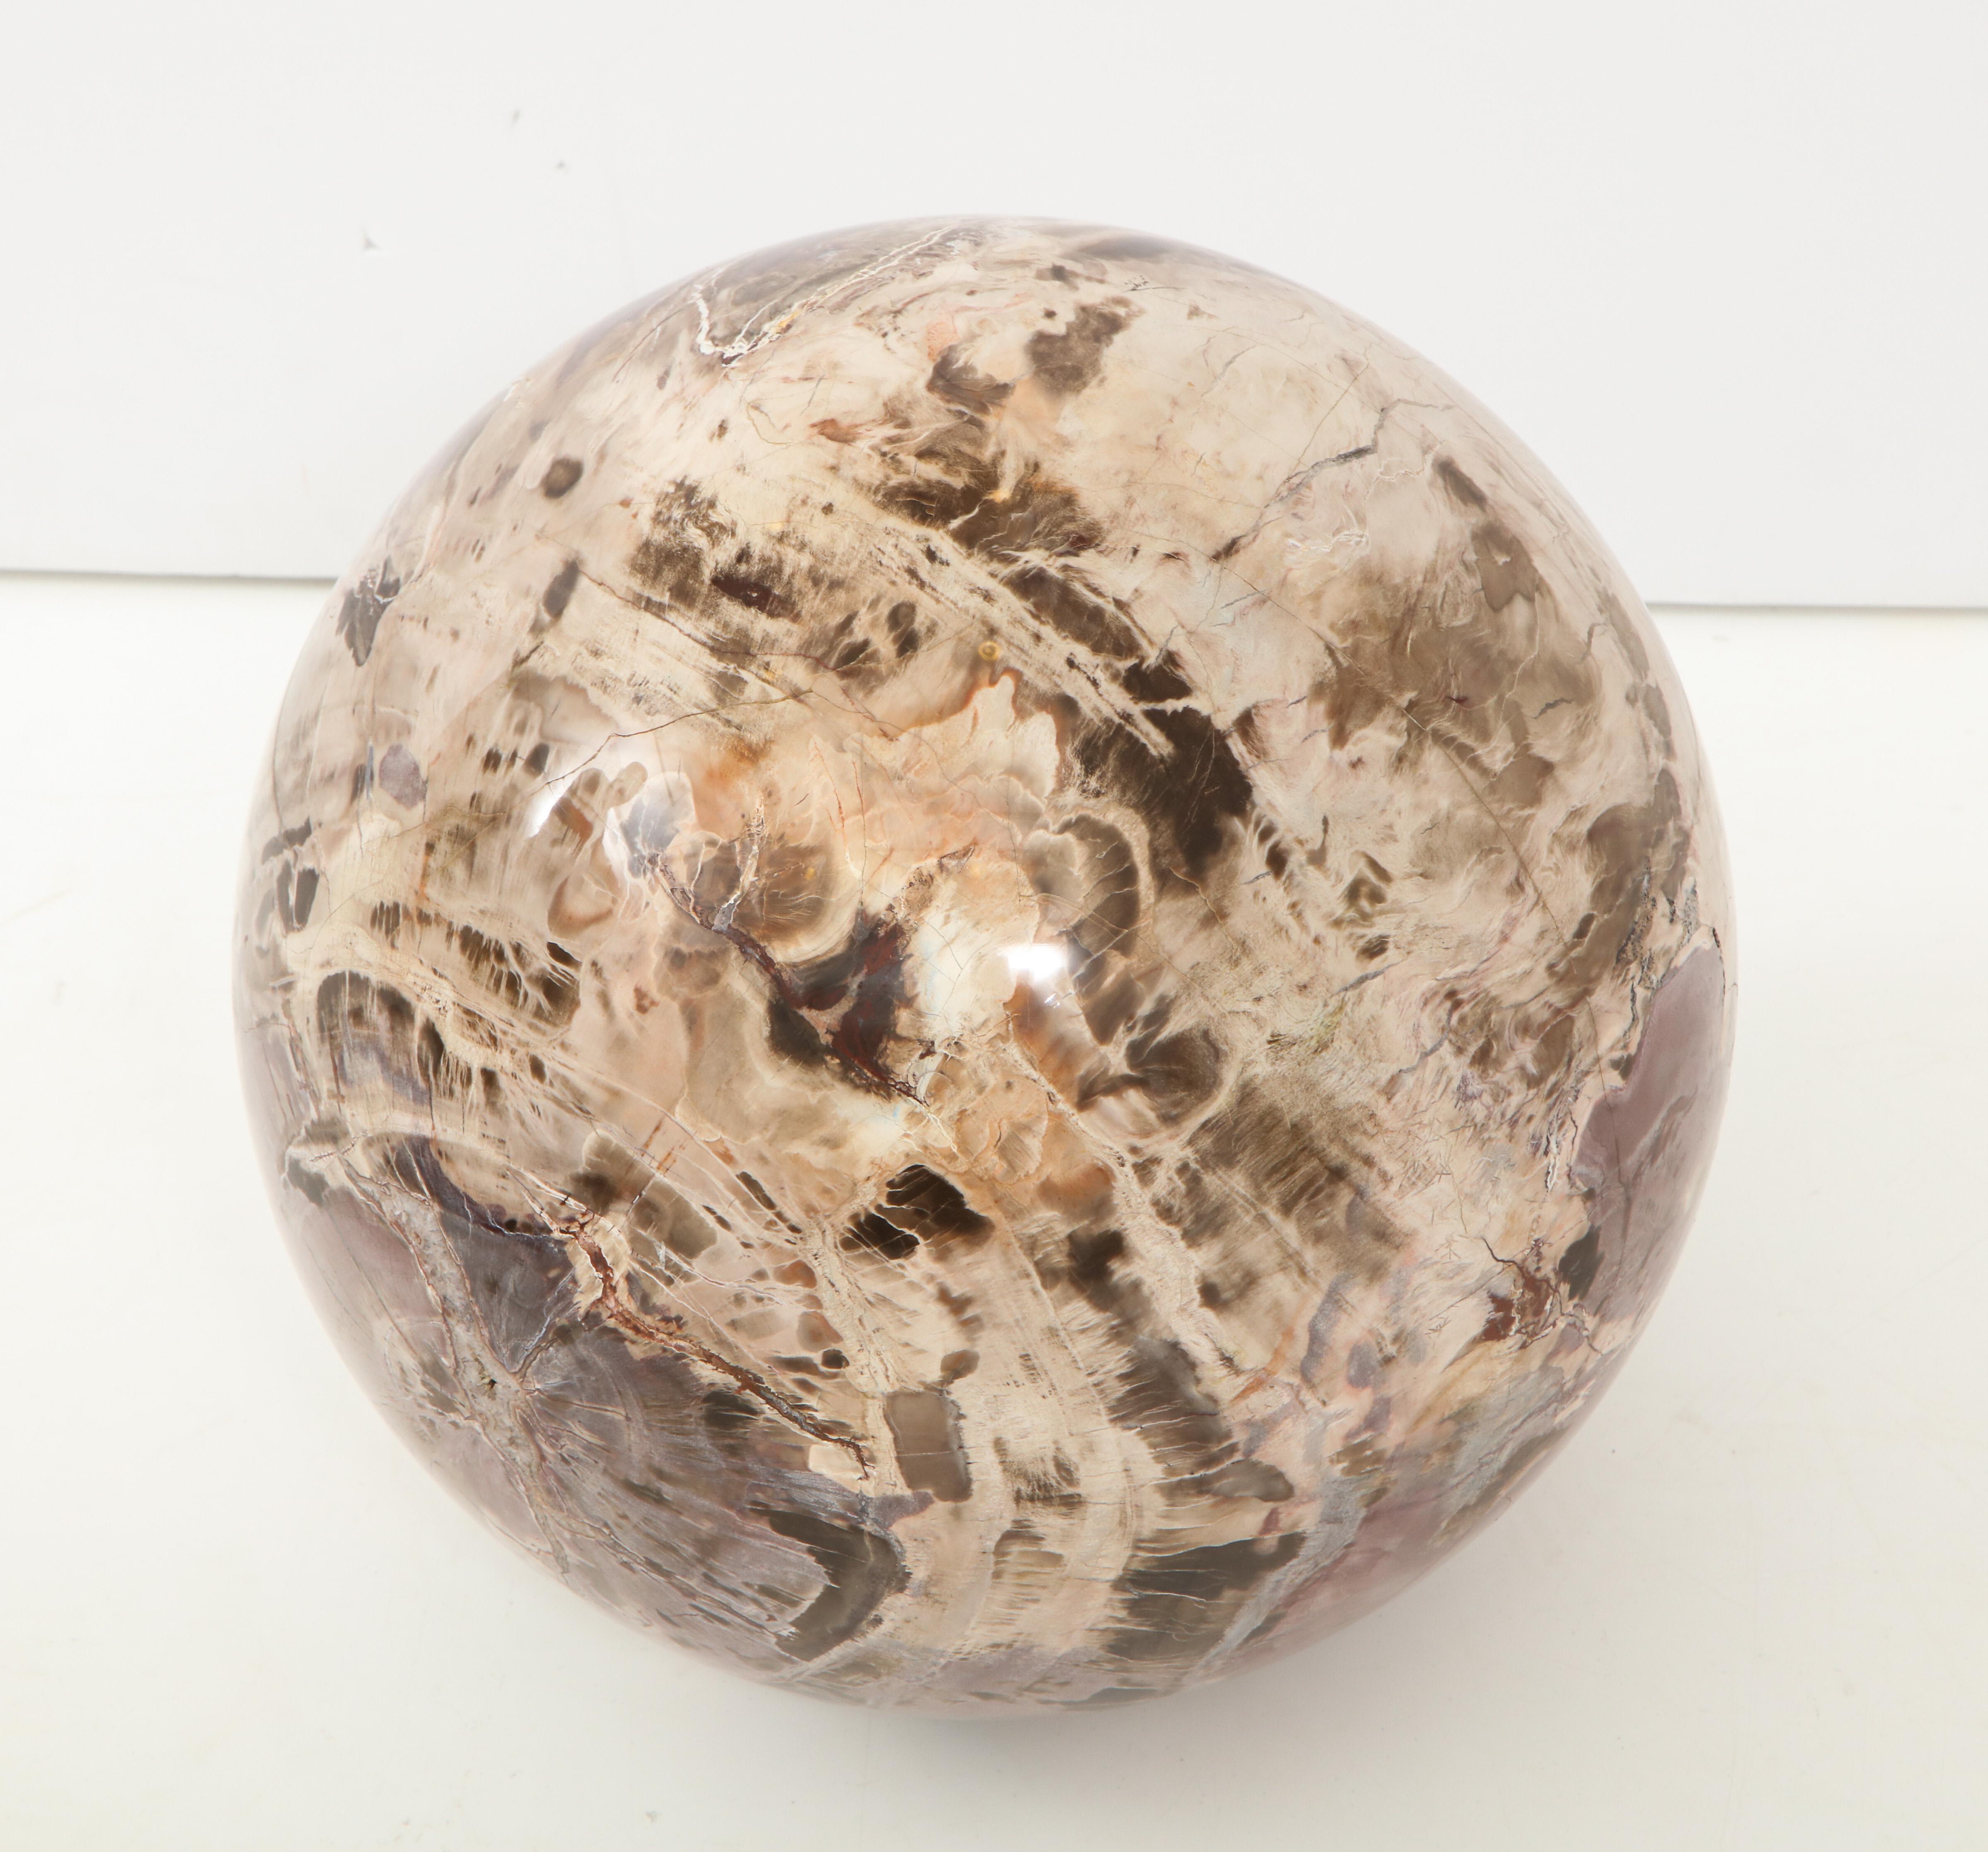 Spectacular polished petrified wood sphere.
The sphere sits on a separate polished 6